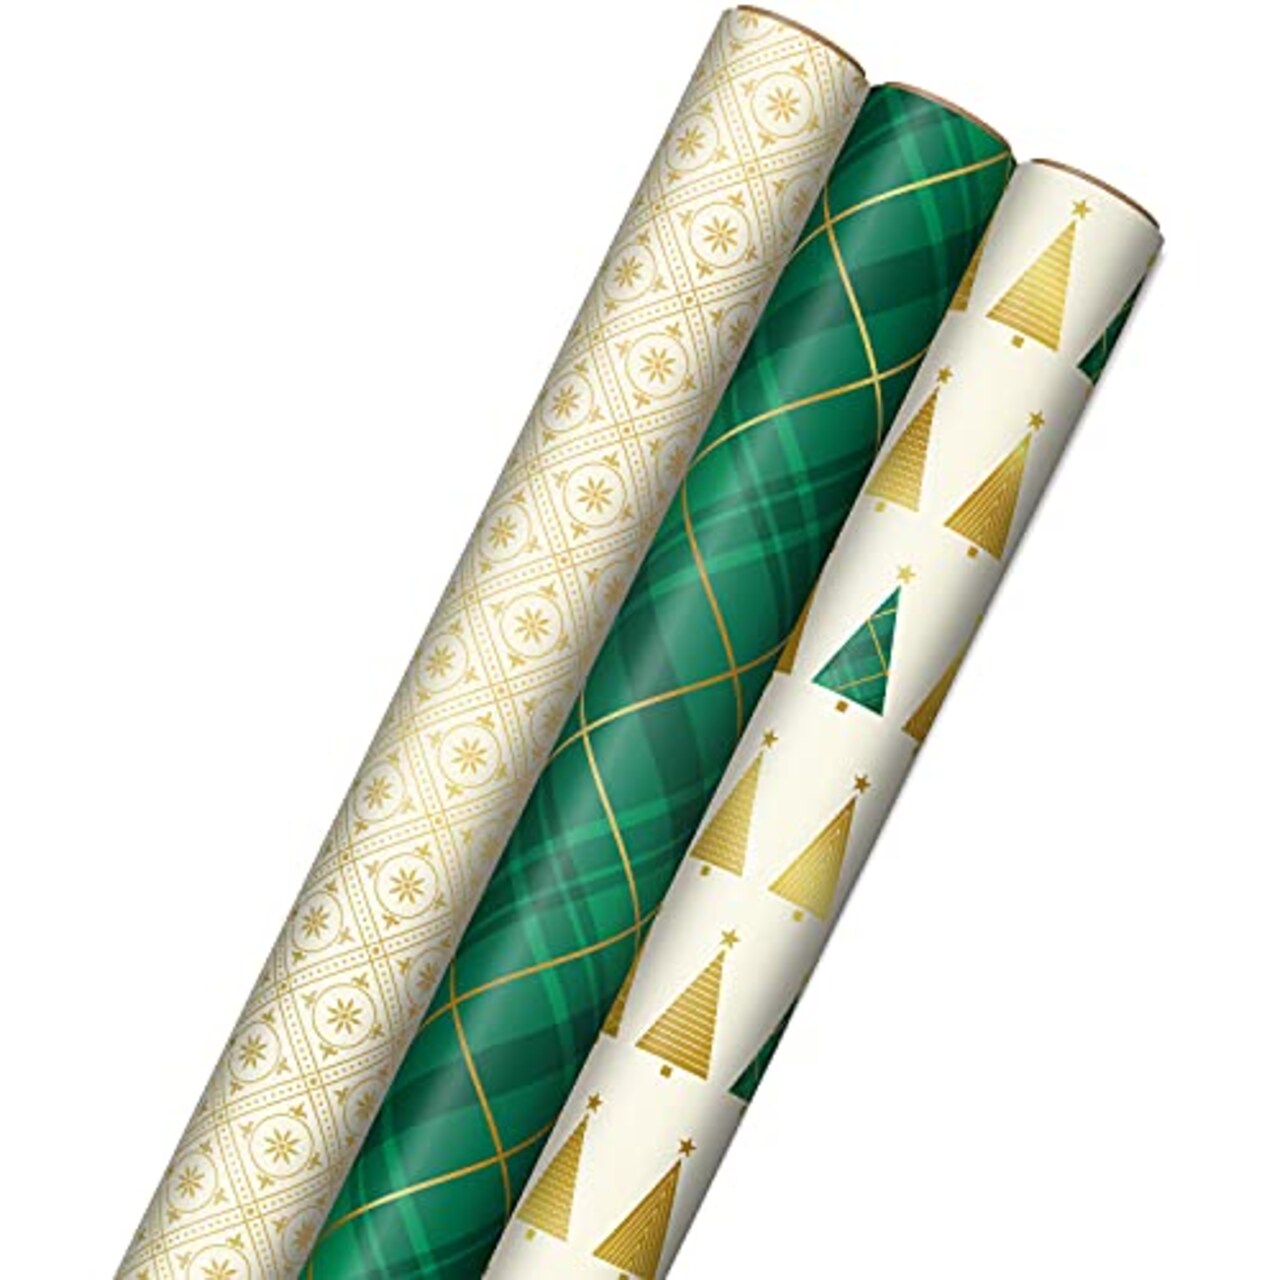 Hallmark Elegant Christmas Wrapping Paper with Cut Lines on